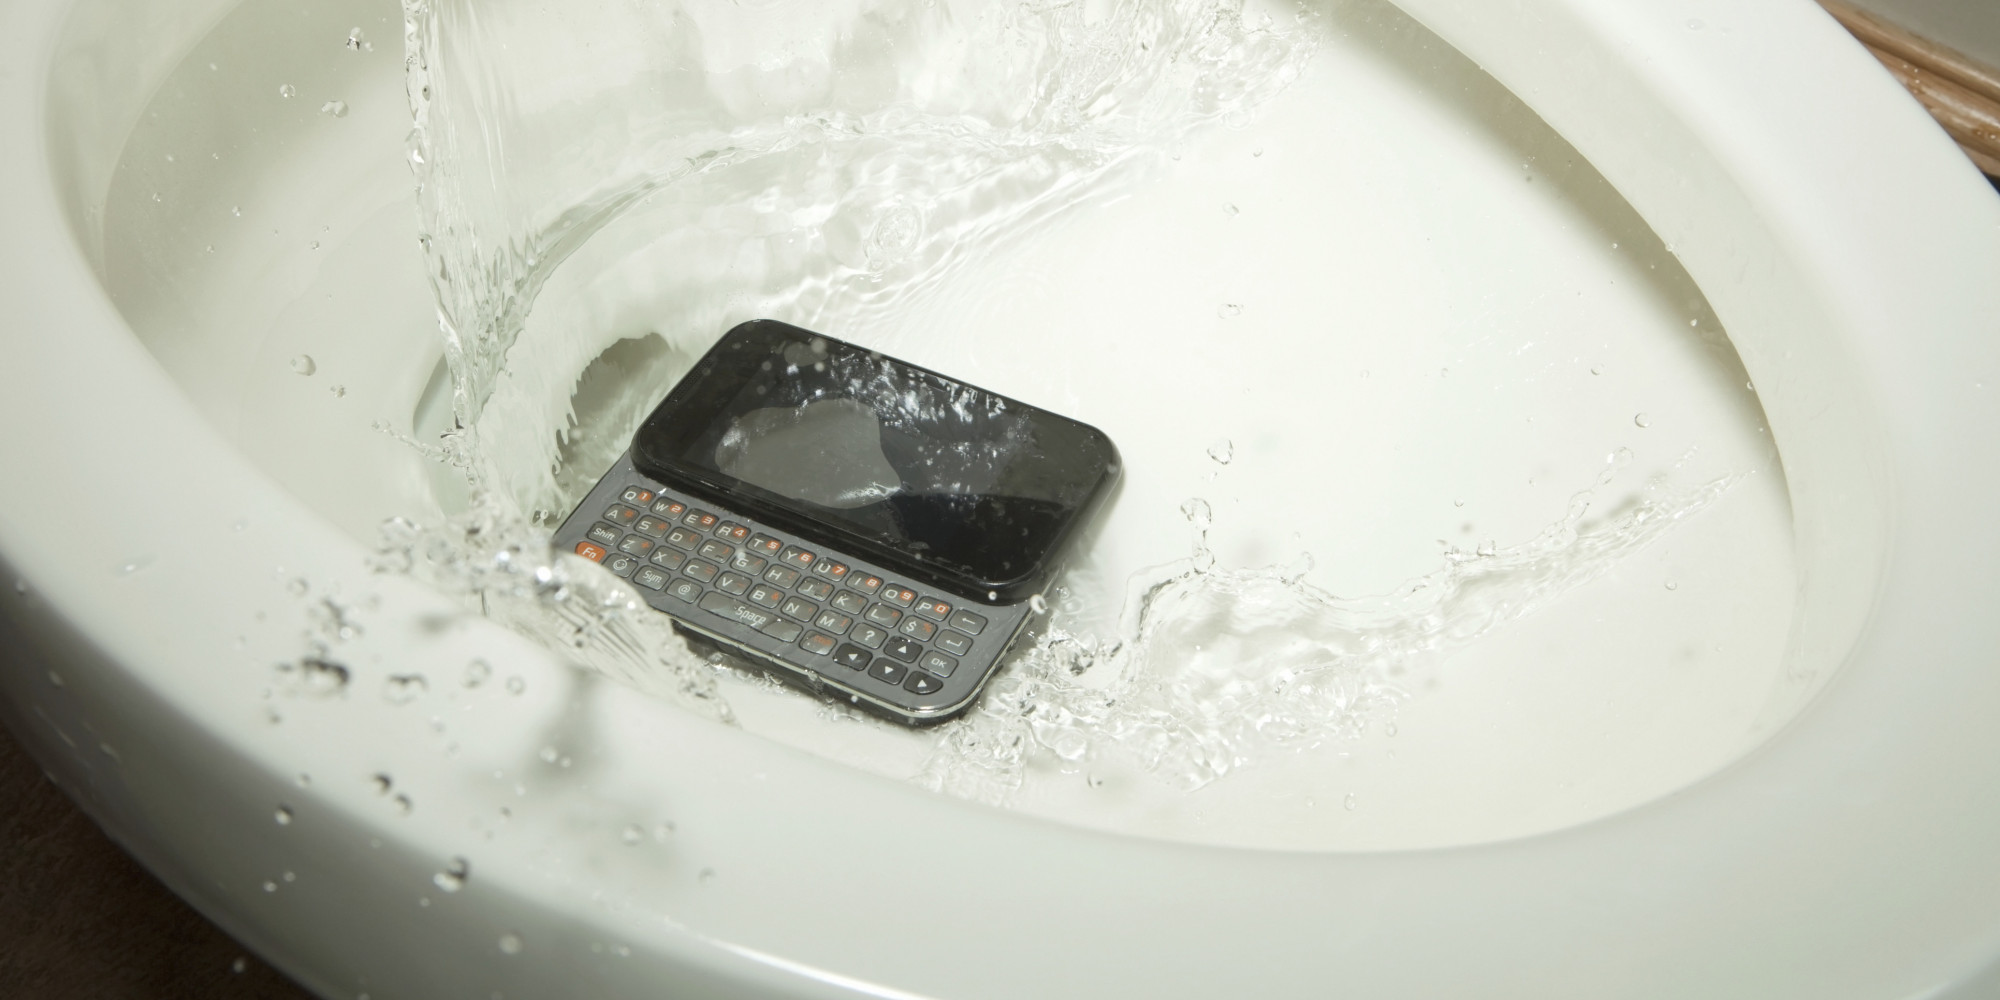 Mobile Phone Drops into a Toilet